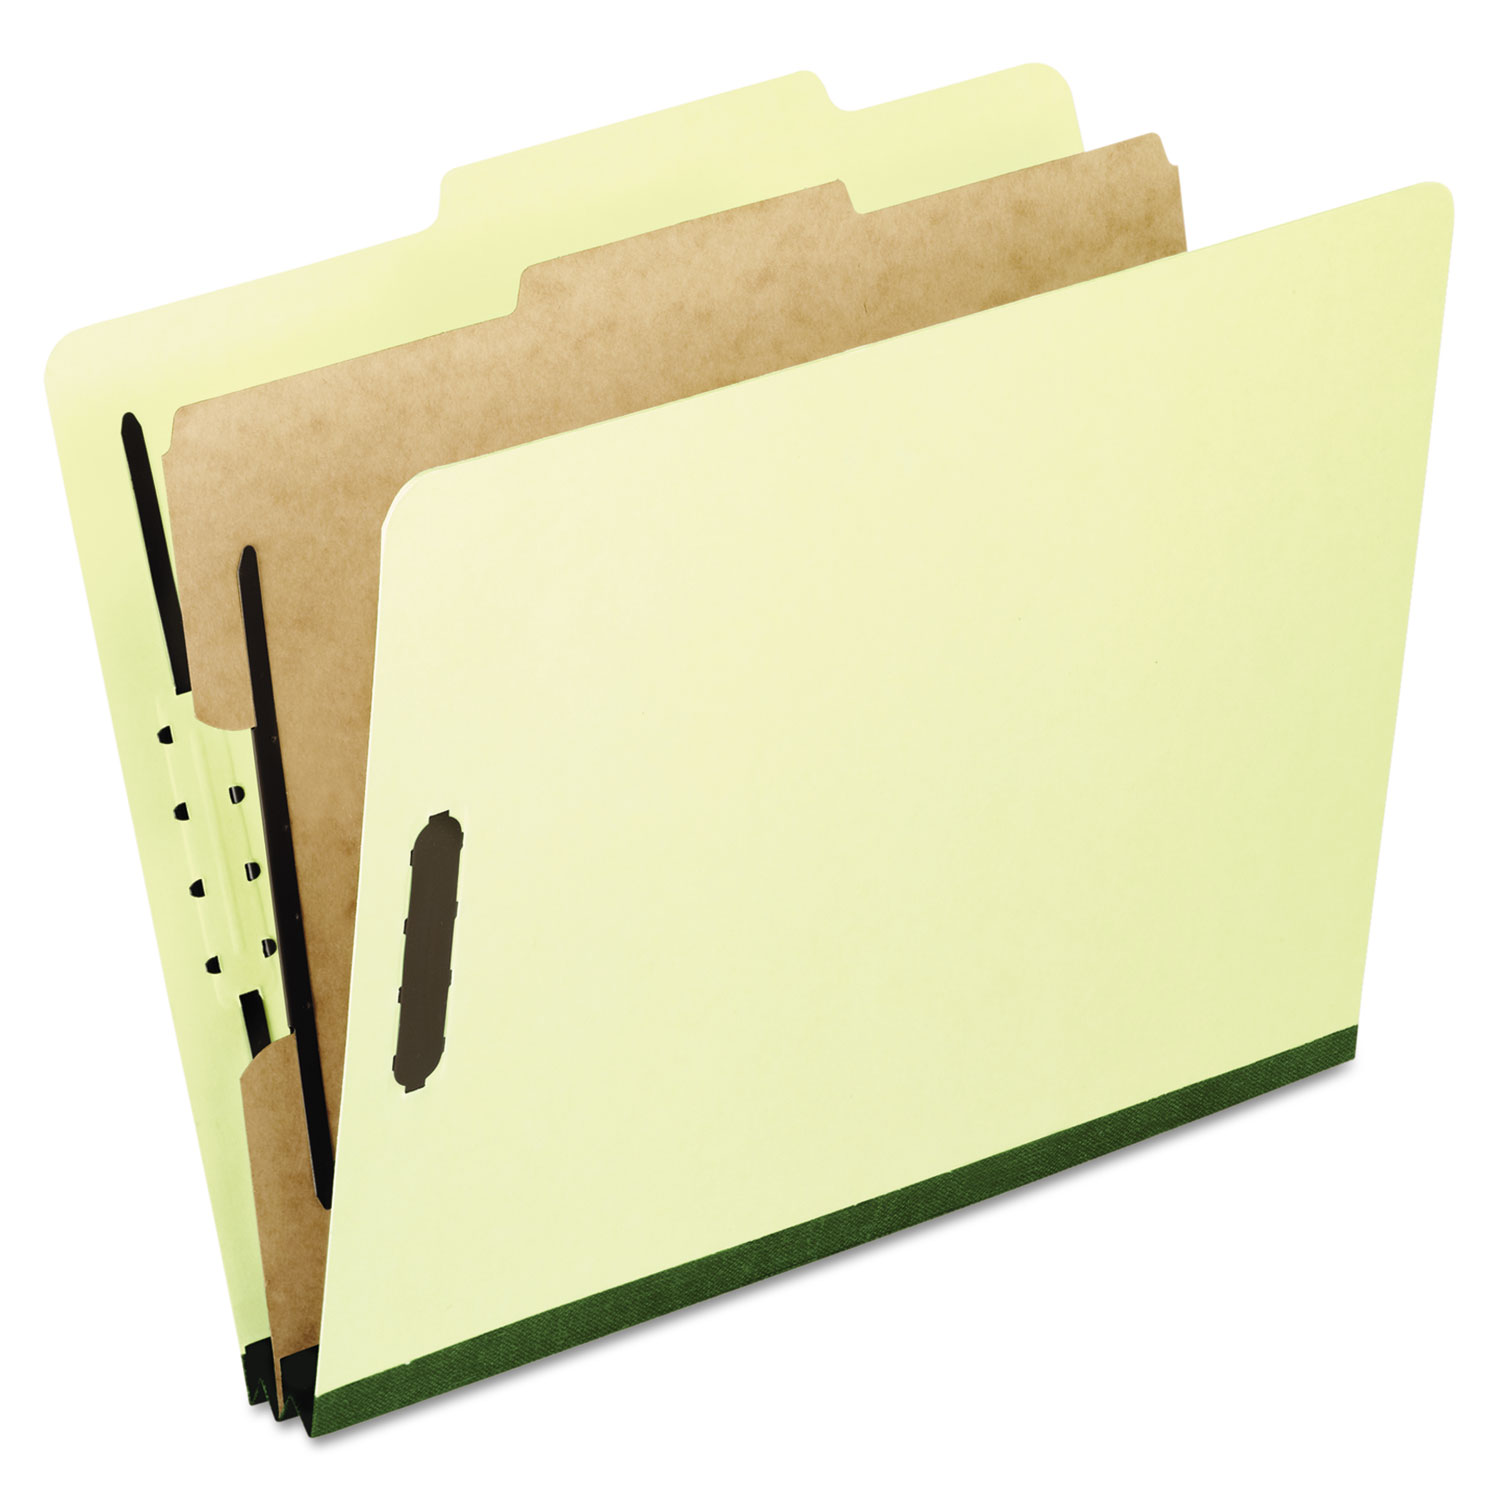  Pendaflex 1157G Four-, Six-, and Eight-Section Pressboard Classification Folders, 1 Divider, Embedded Fasteners, Letter, Light Green, 10/Box (PFX1157G) 